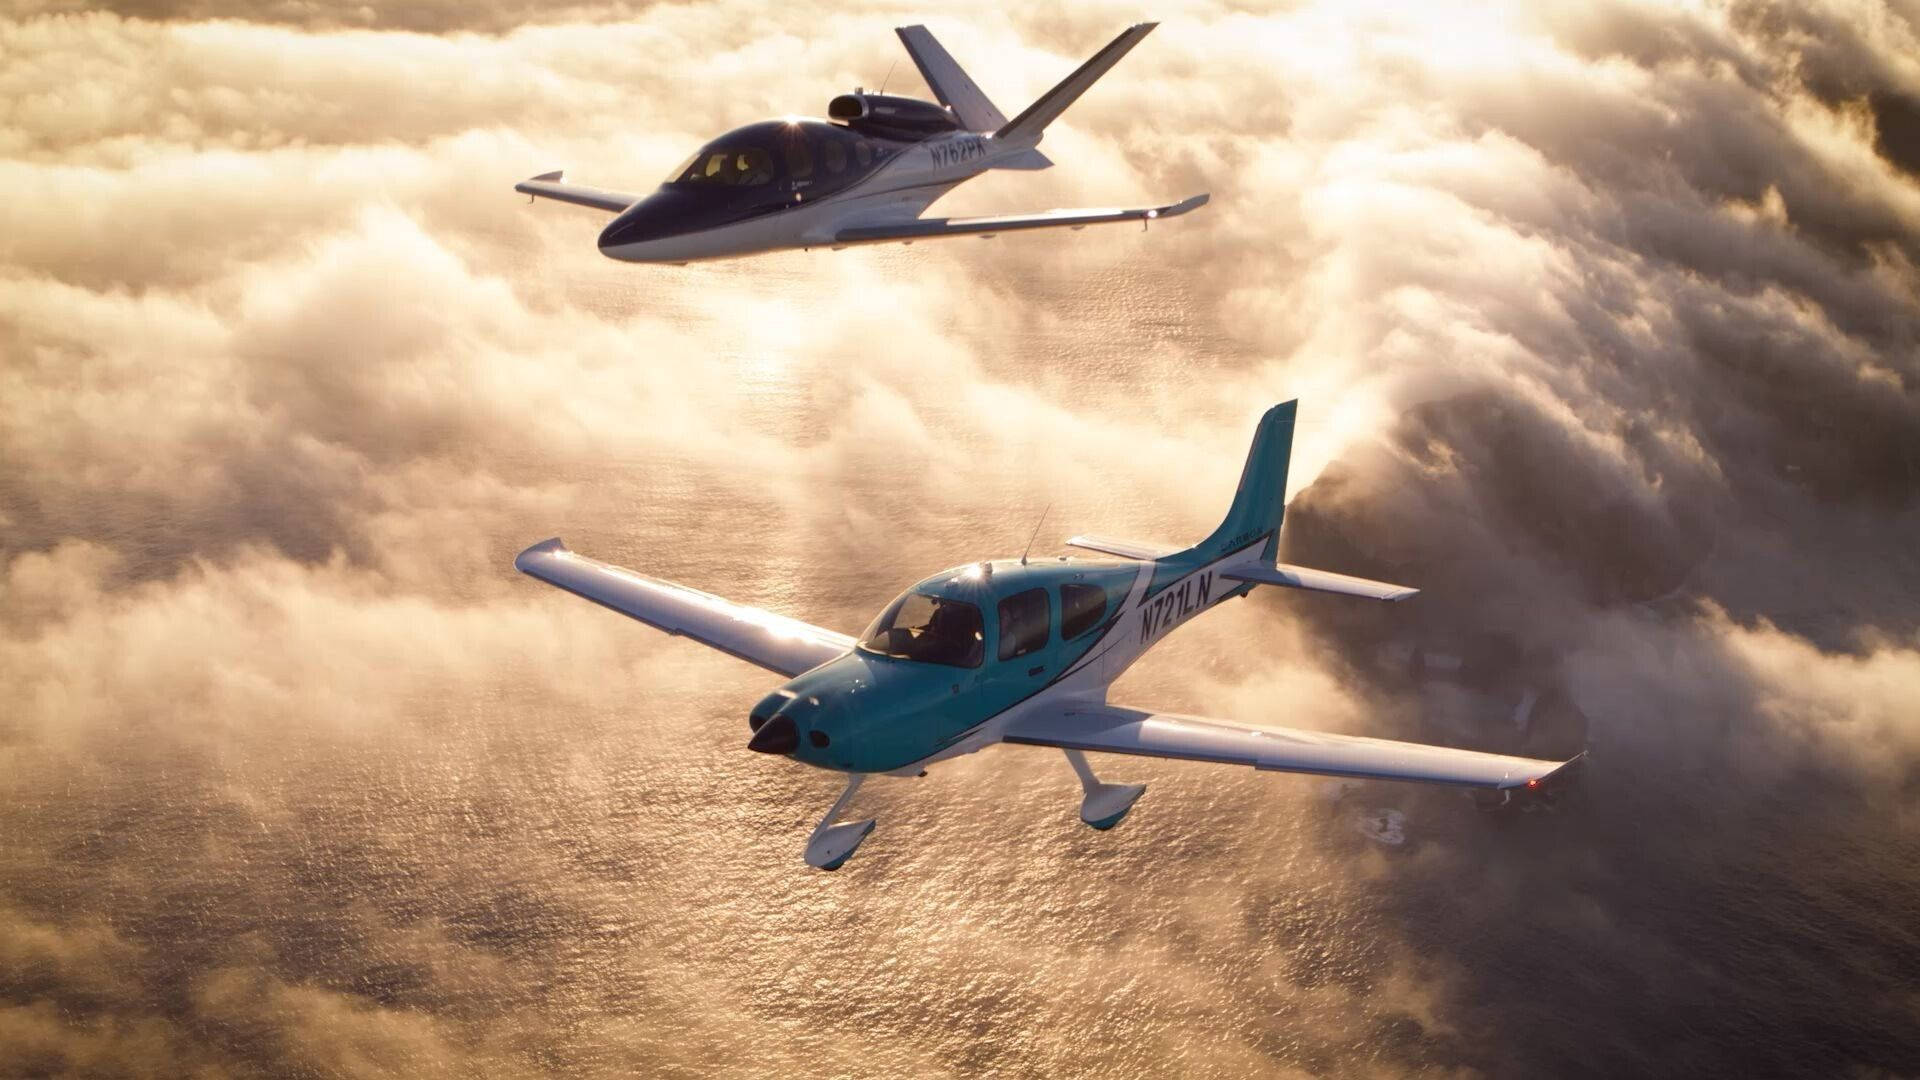 Small Planes In The Clouds Background